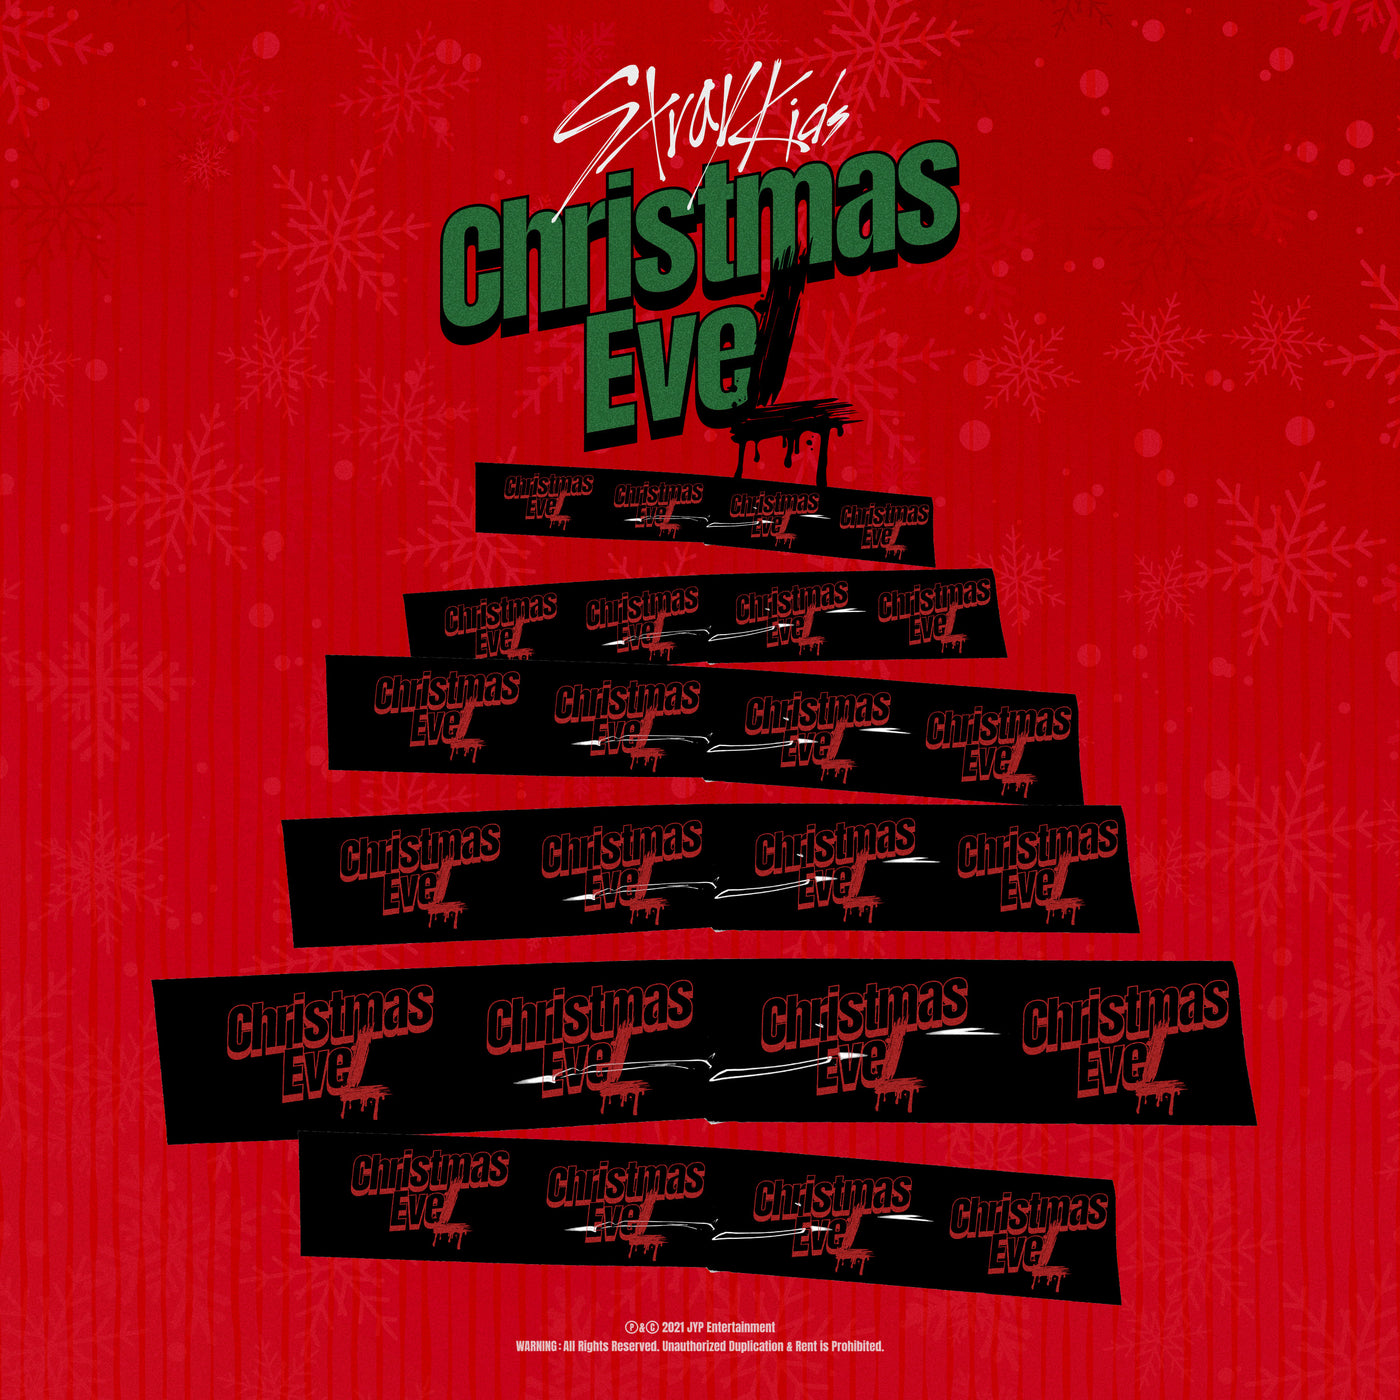 Stray Kids Holiday Special Single [Christmas EveL] (Normal VER) 🇰🇷